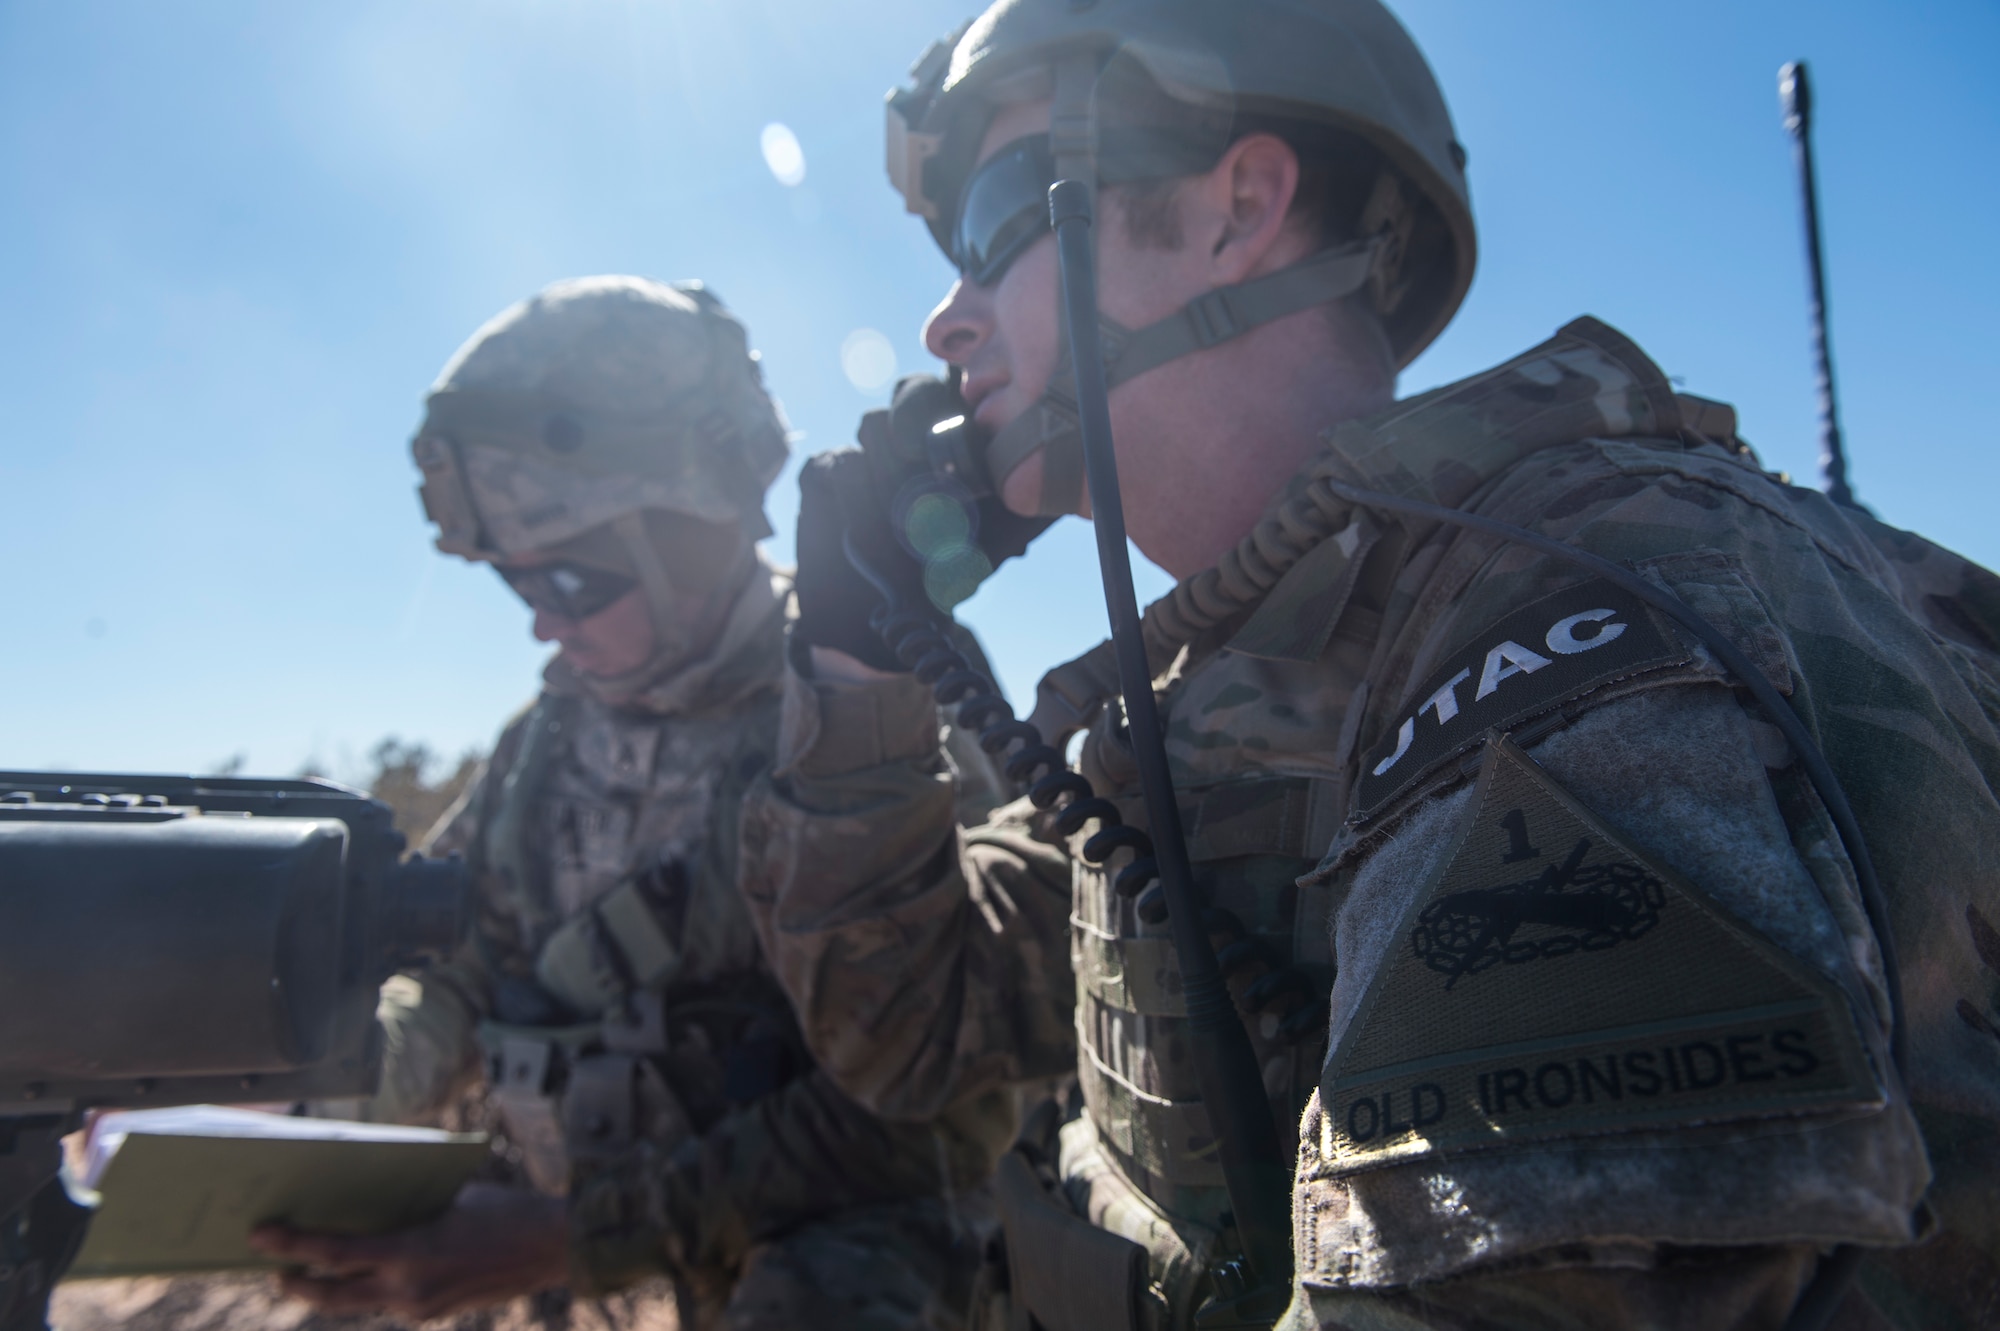 U.S. Air Force Staff Sgt. Lonny Cunningham, 7th Air Support Operations Squadron joint terminal attack controller, right, uses the Lightweight Laser Designator Rangefinder while U.S. Army Staff Sgt. Patrick Kuster, 3rd Brigade Combat Team, 1st Armored Division, write coordinates during the joint exercise, Iron Focus, Feb. 3, 2016, at Oro Grande Training Complex at Fort Bliss, Texas. The LLDR provides coordinates for both GPS-guided and ordinary munitions. (U.S. Air Force photo by Senior Airman Olivia Dominique/Released)  